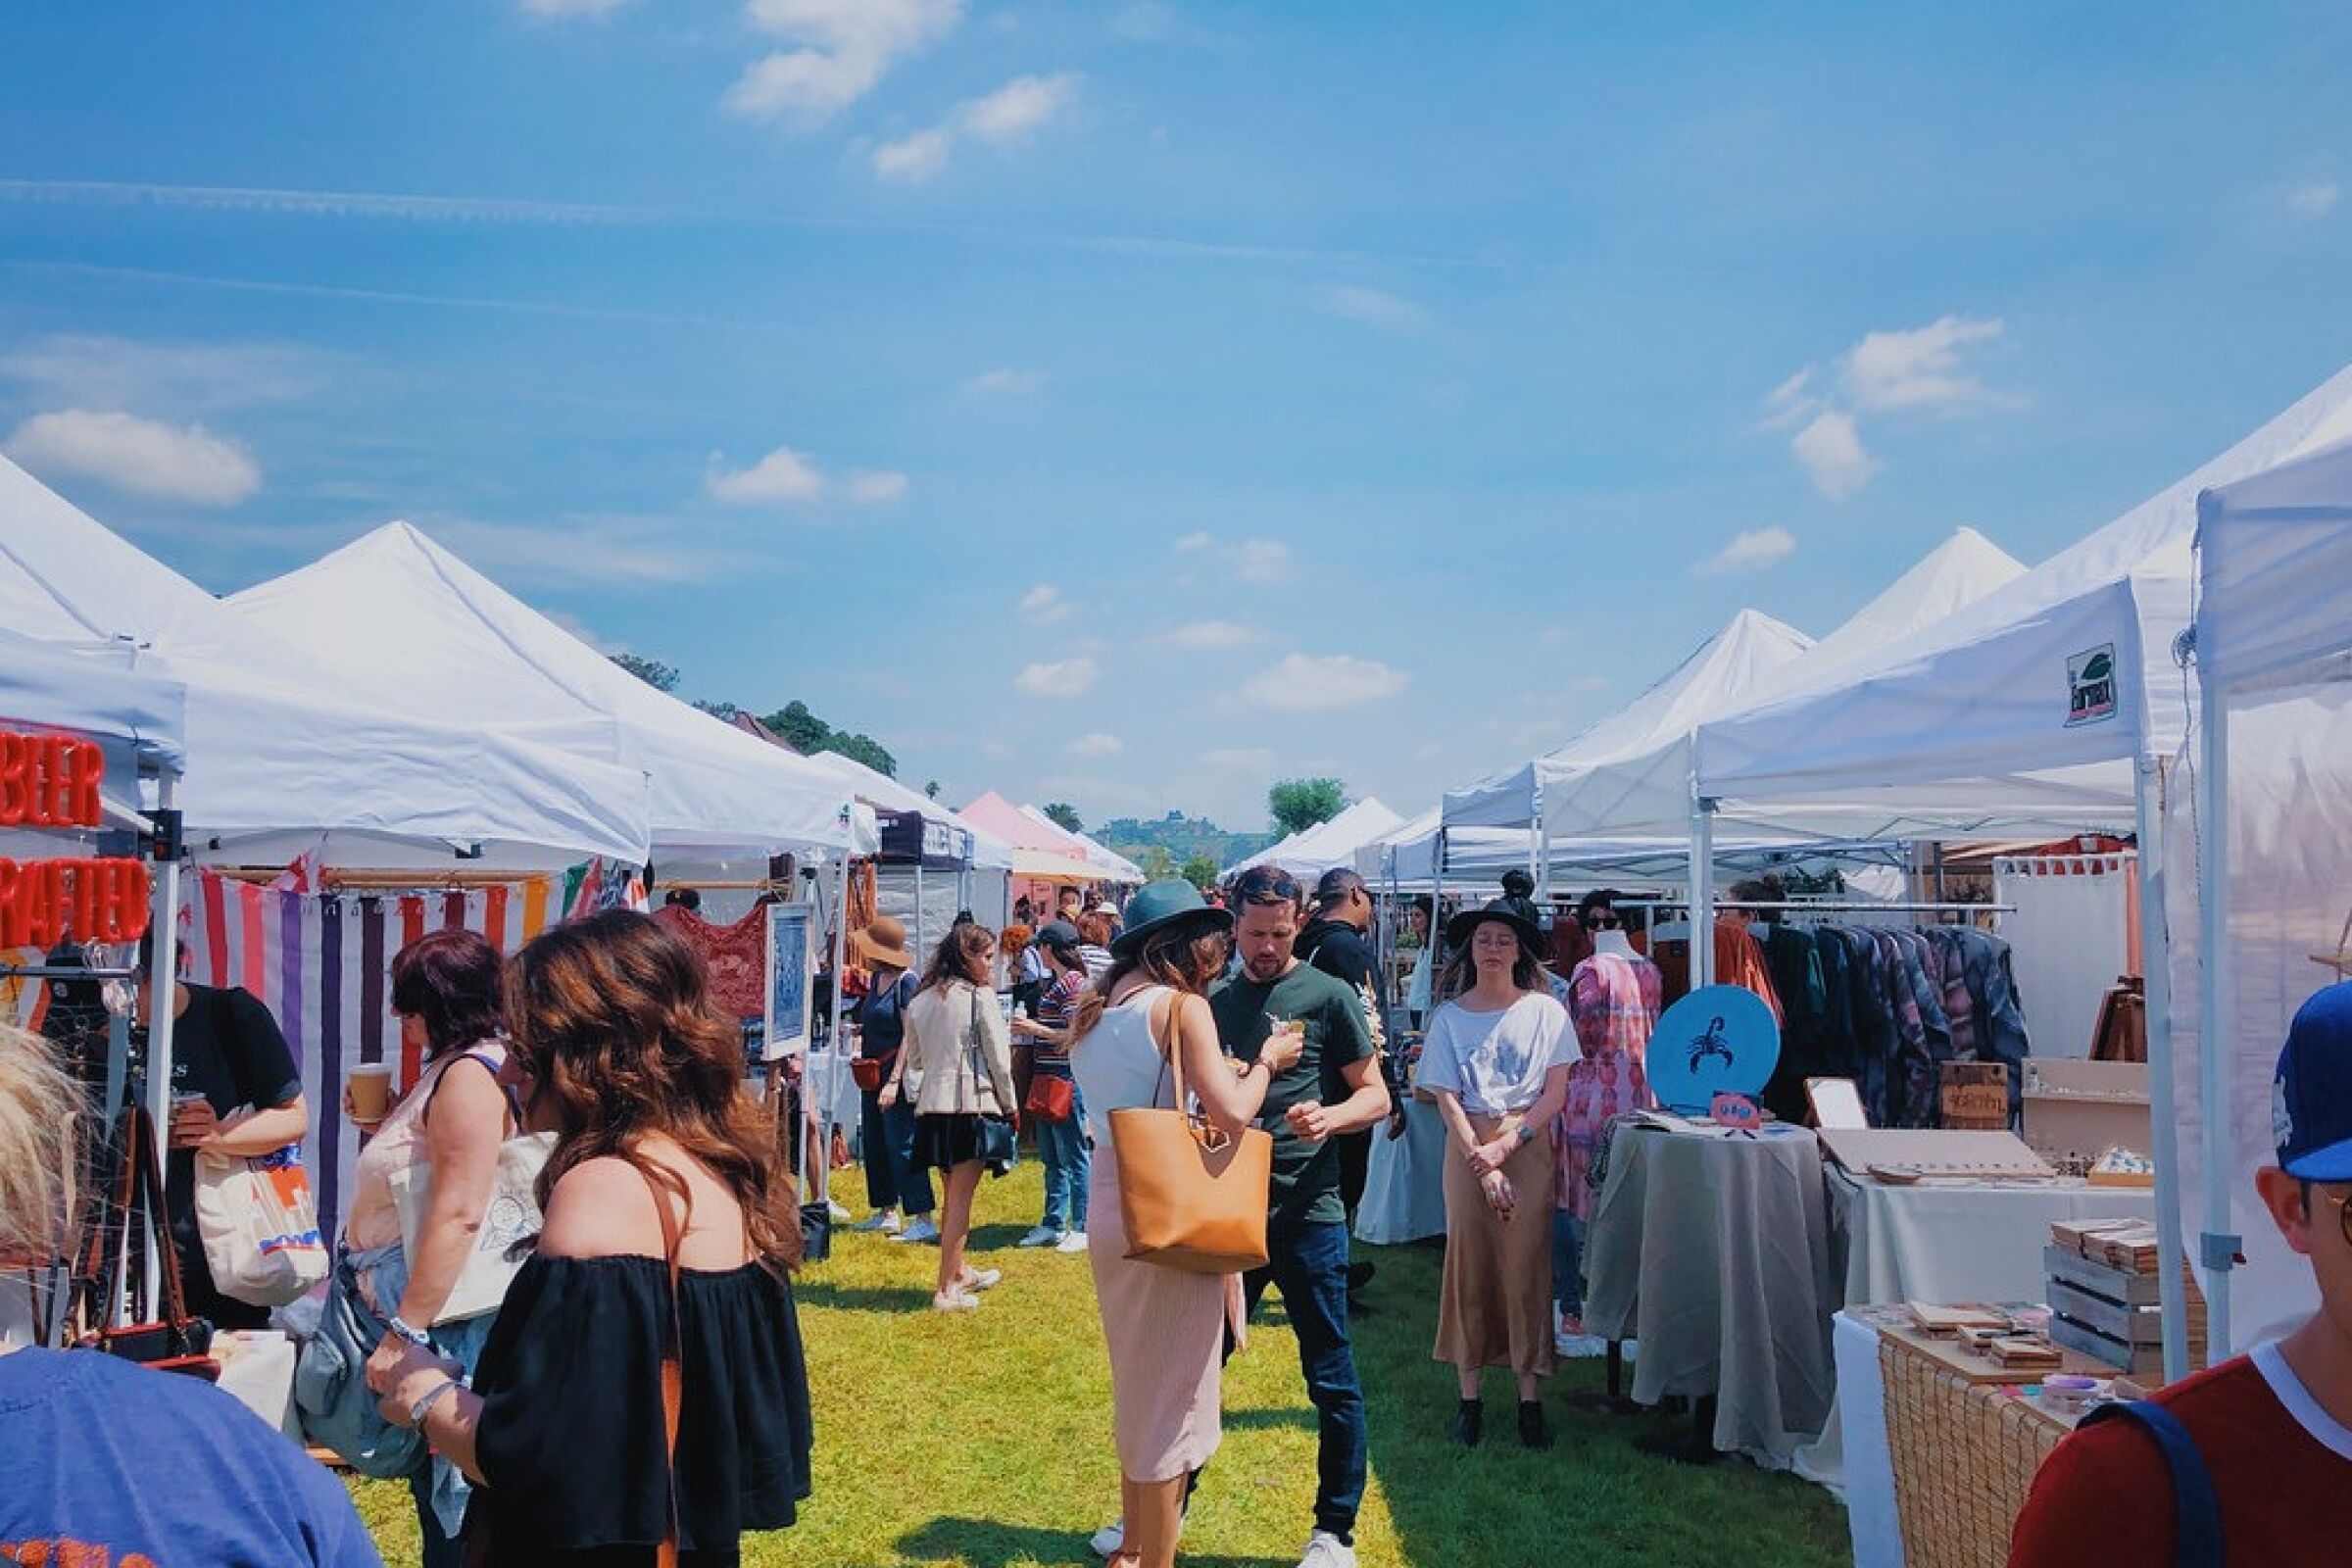 Last year's Renegade Craft Fair was held outdoors at the Los Angeles State Historic Park.